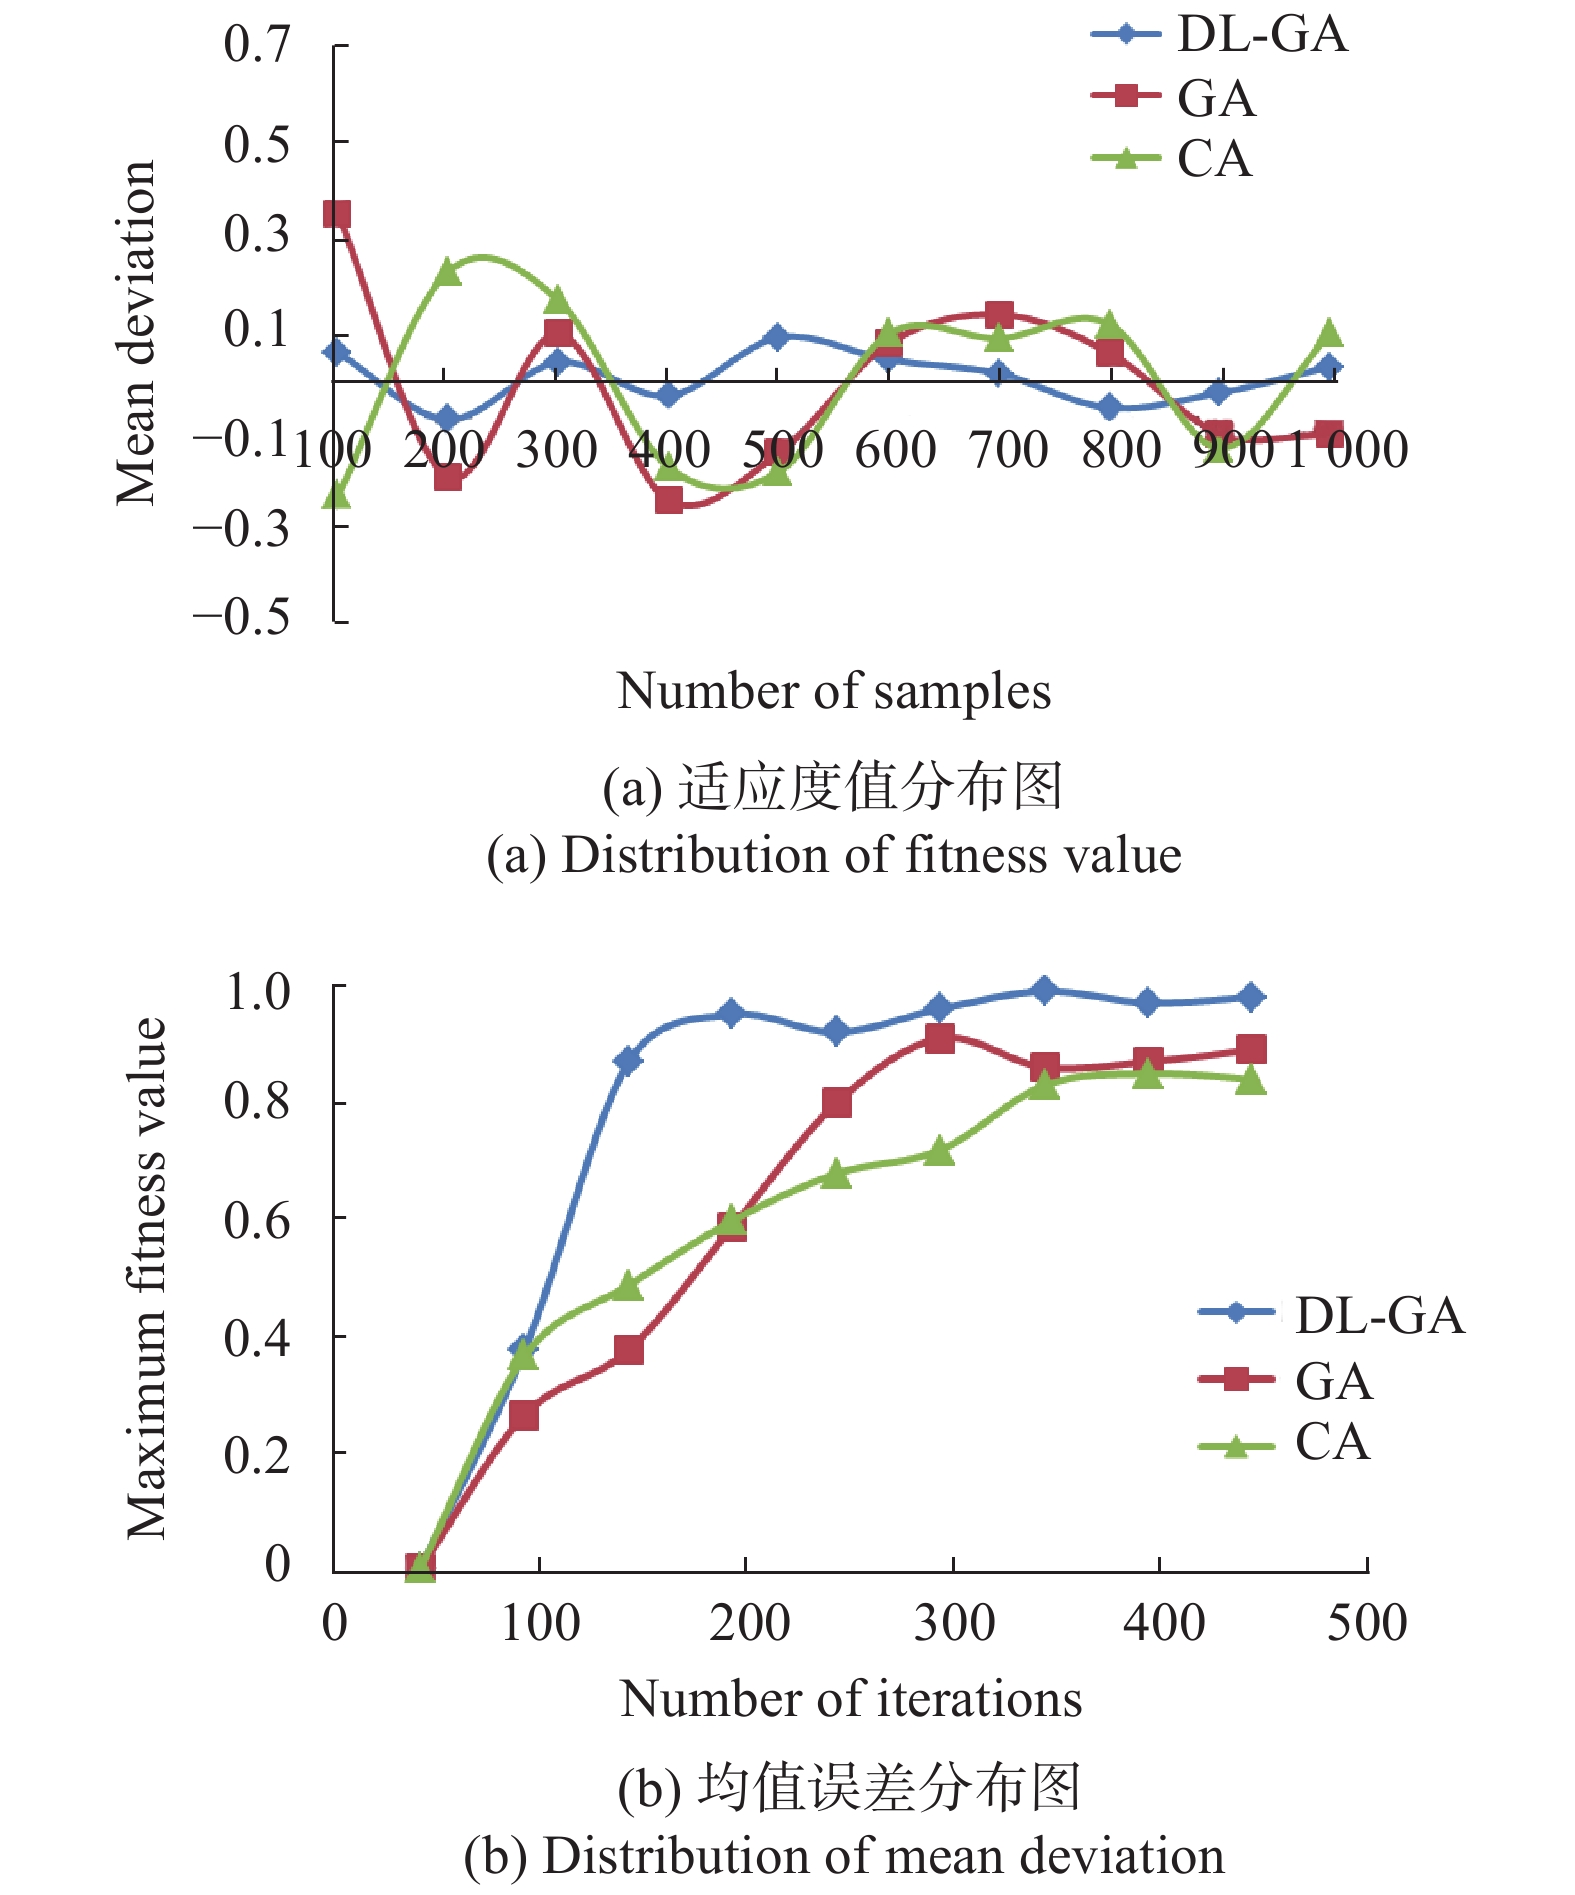 Comparison of the stability of the three algorithms